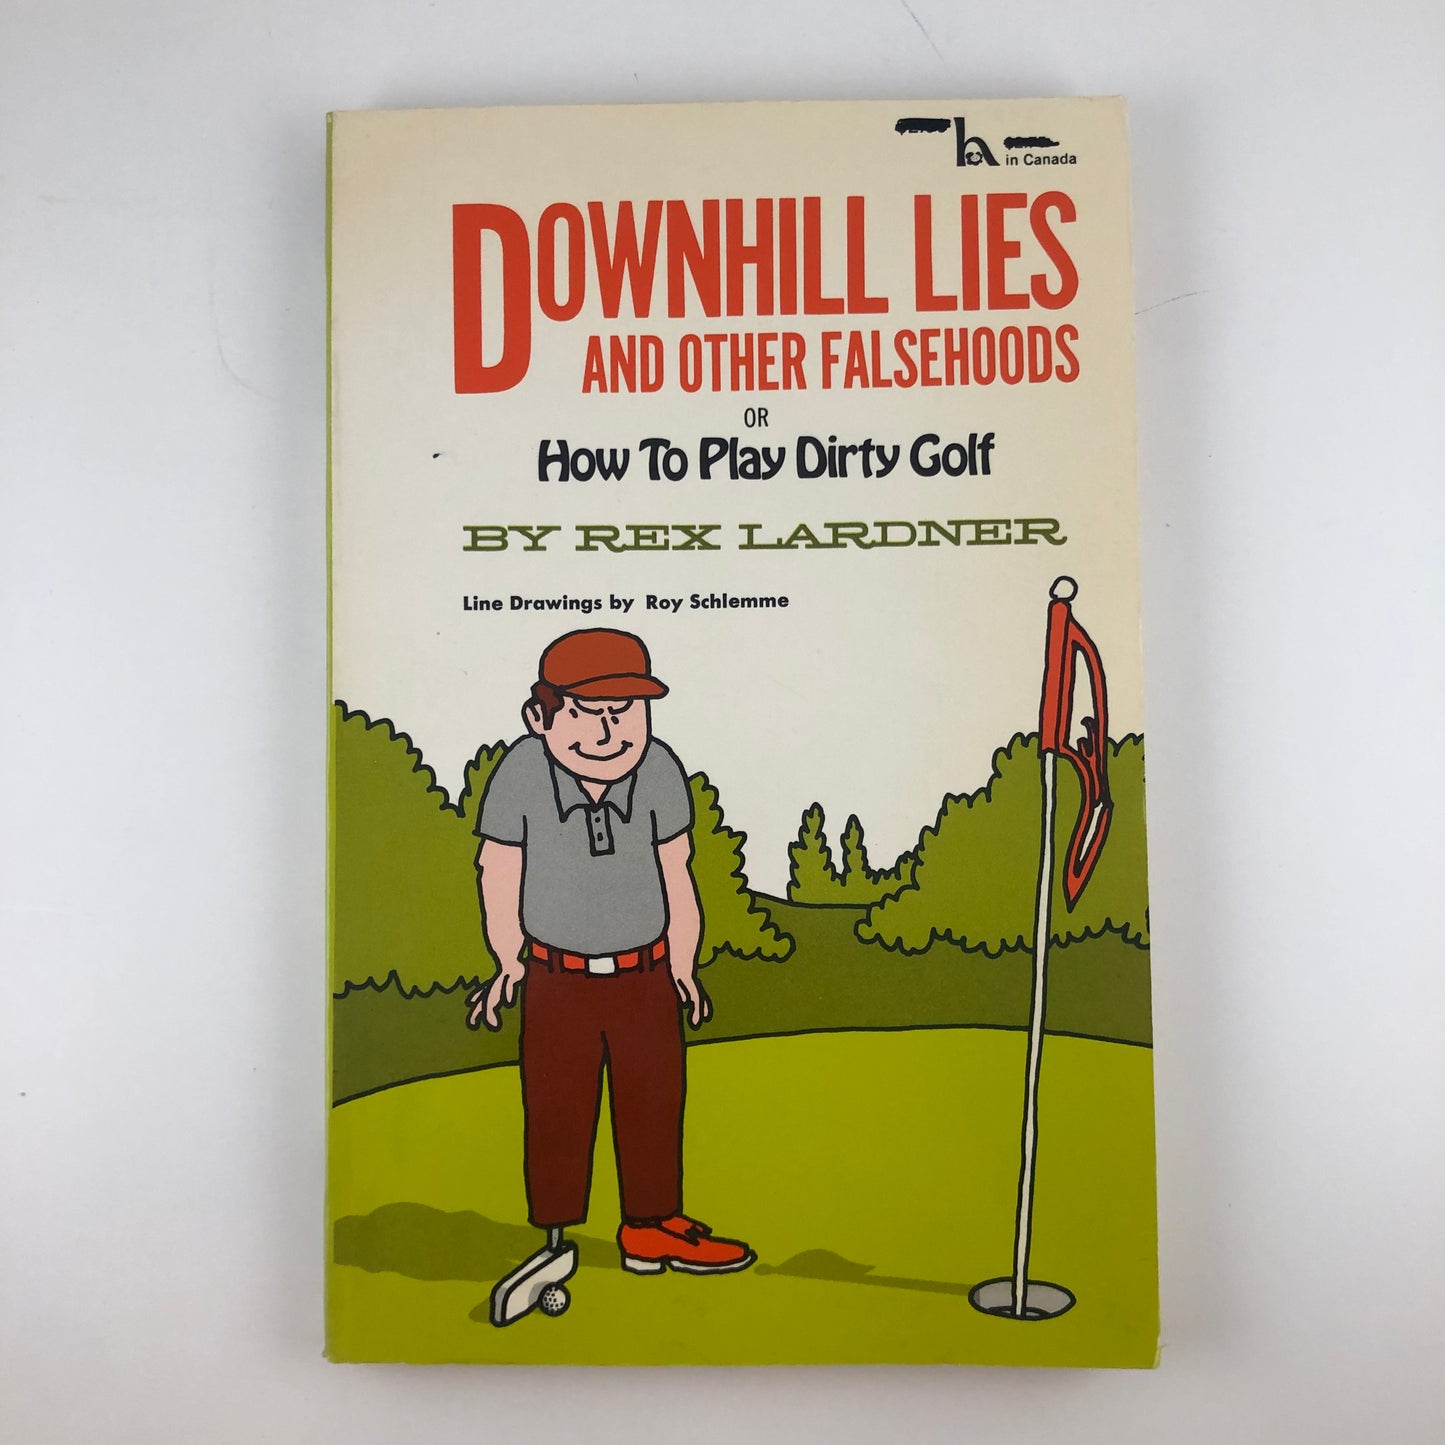 Downhill Lies and Other Falsehoods or How to Play Dirty Golf